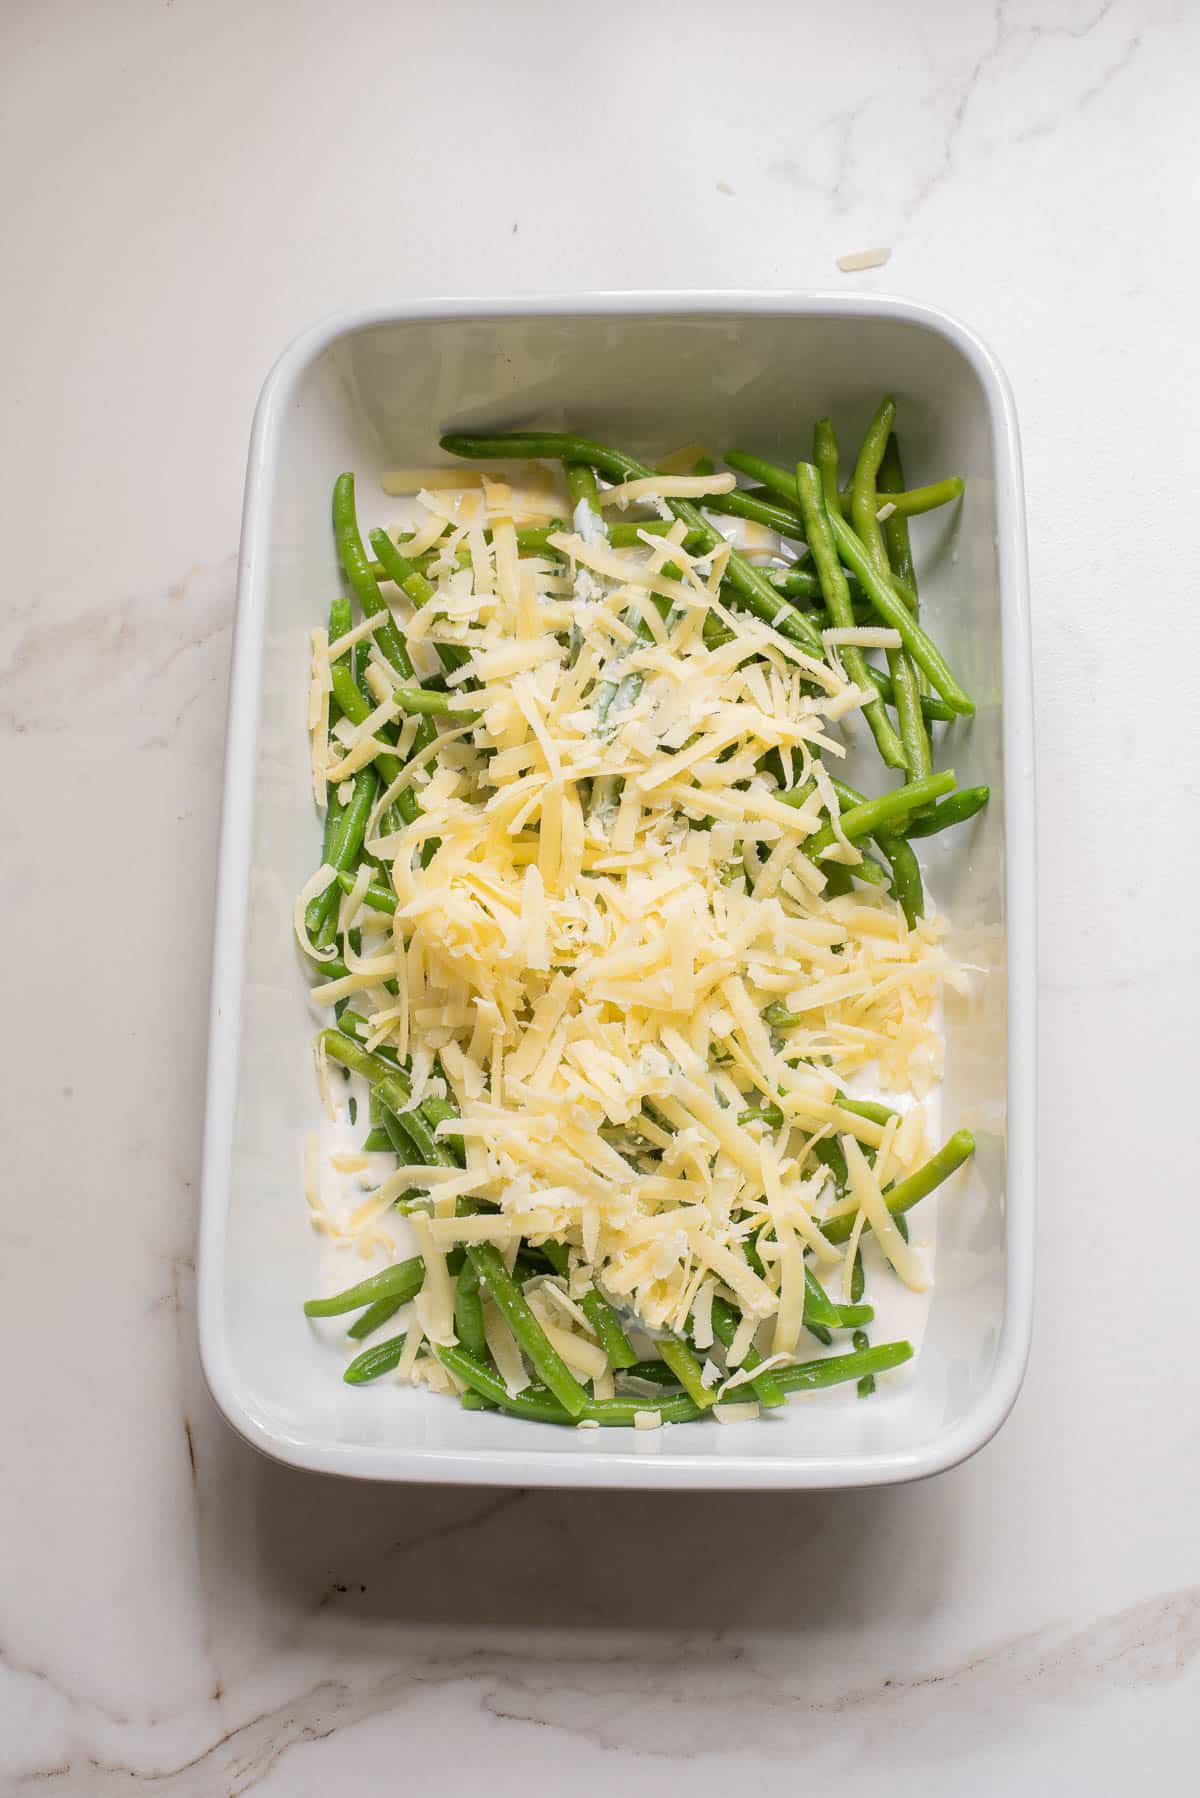 Green beans in white baking dish with cream and cheeses.